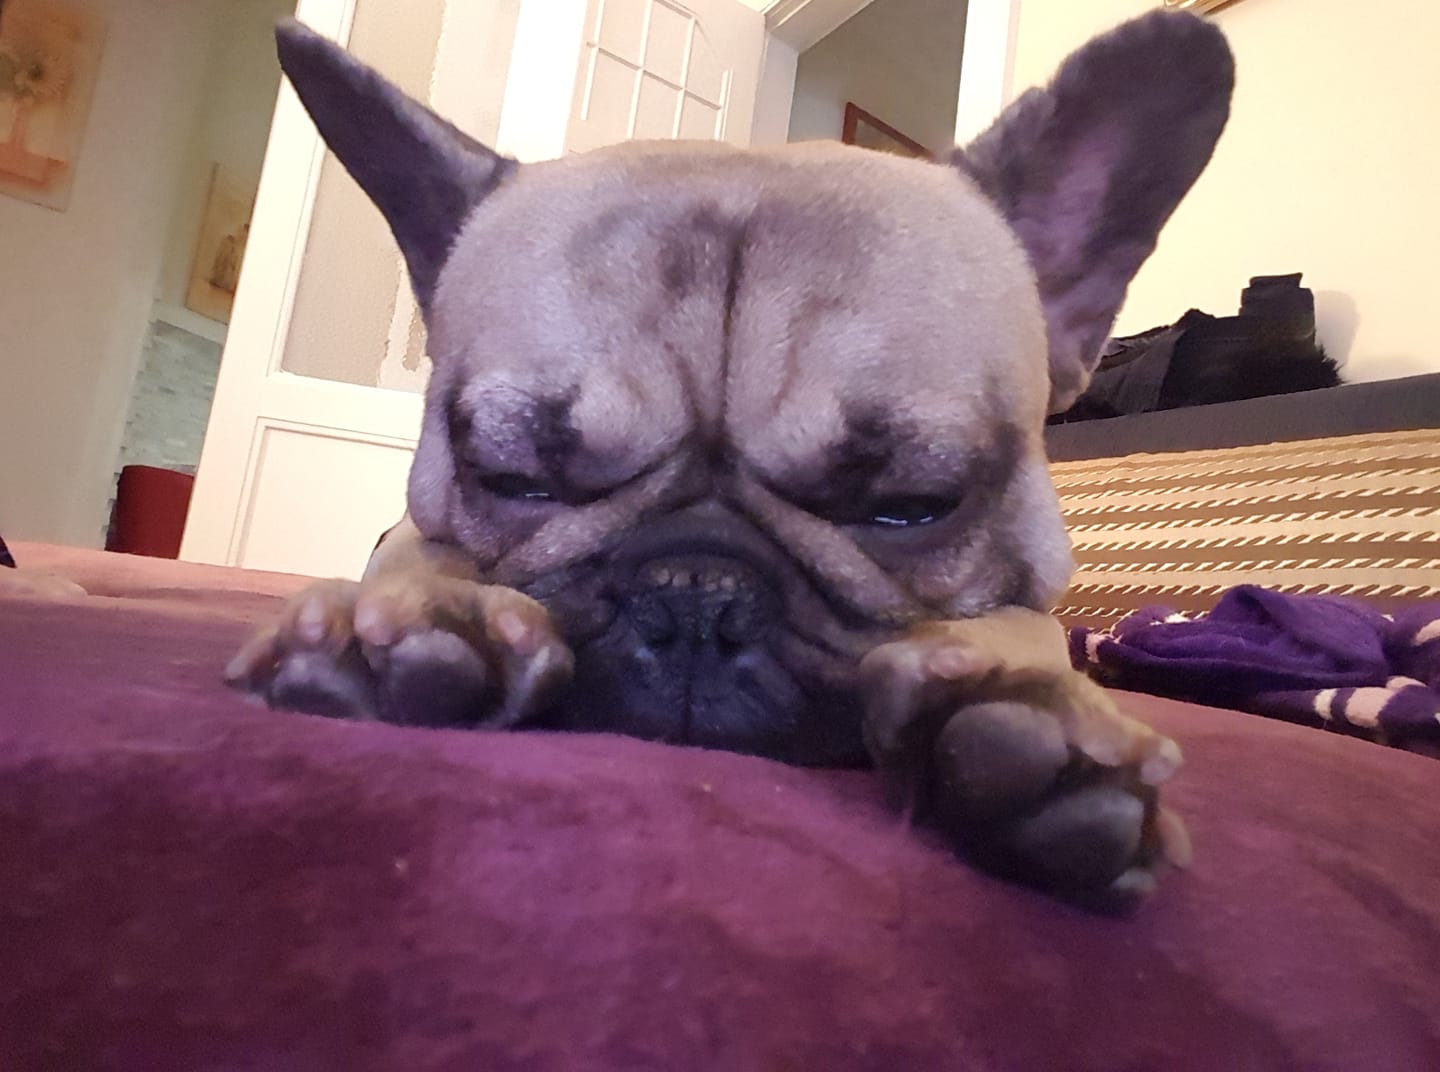 grumpy face of a French Bulldog in between its paws while lying on the bed